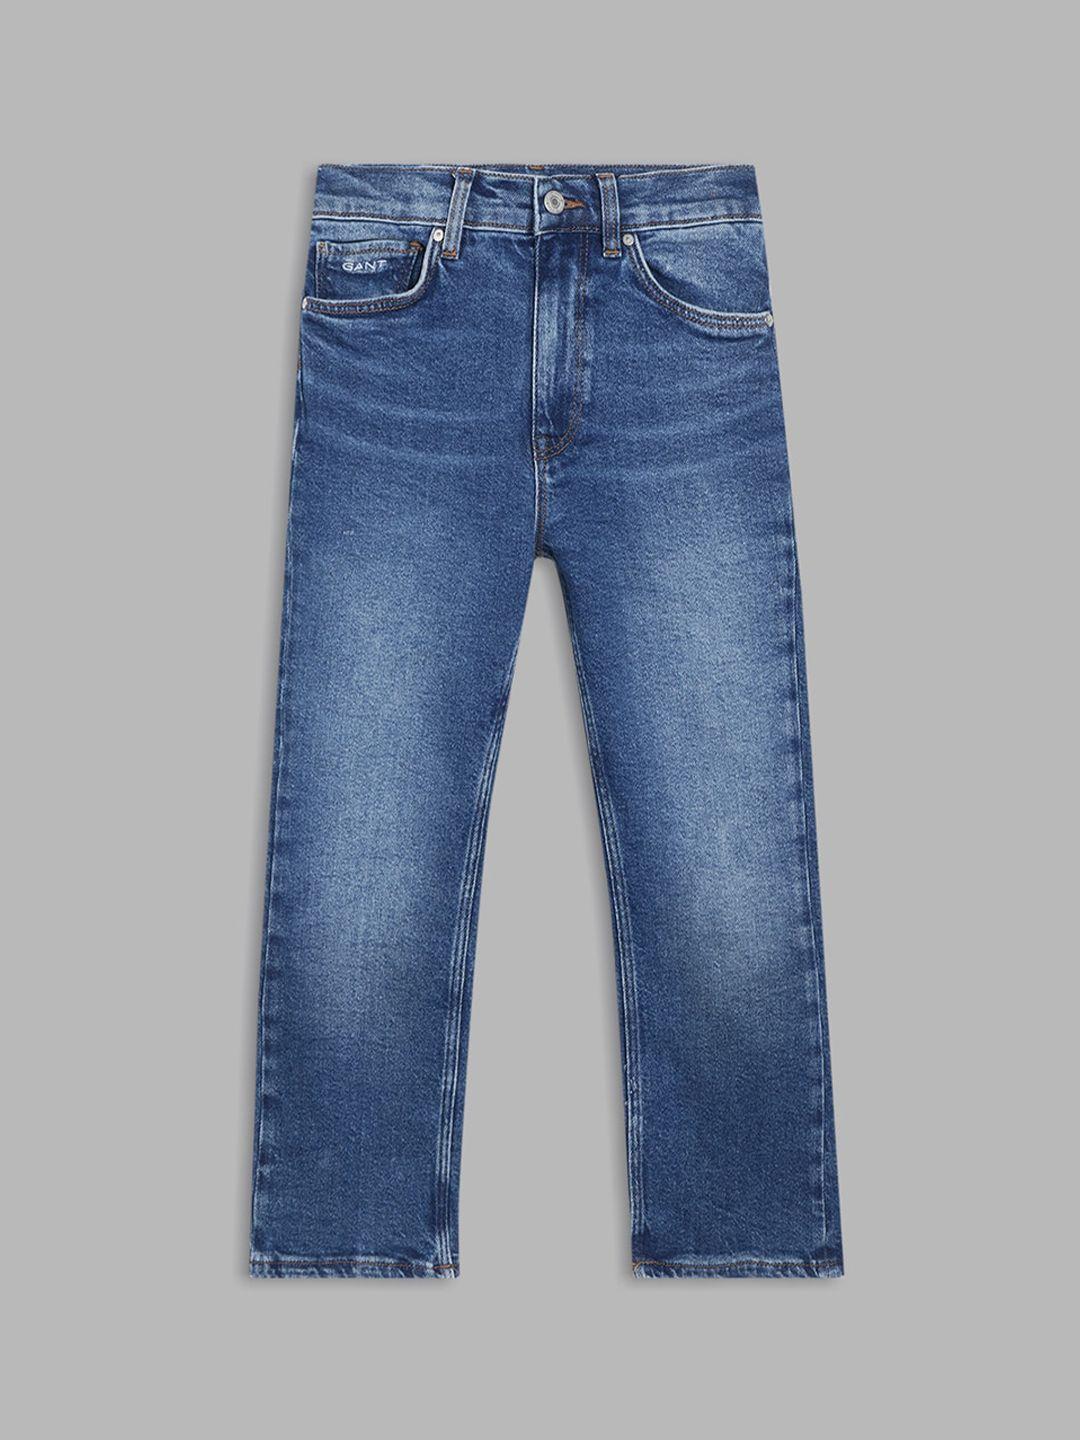 gant boys comfort relaxed fit light fade cotton jeans